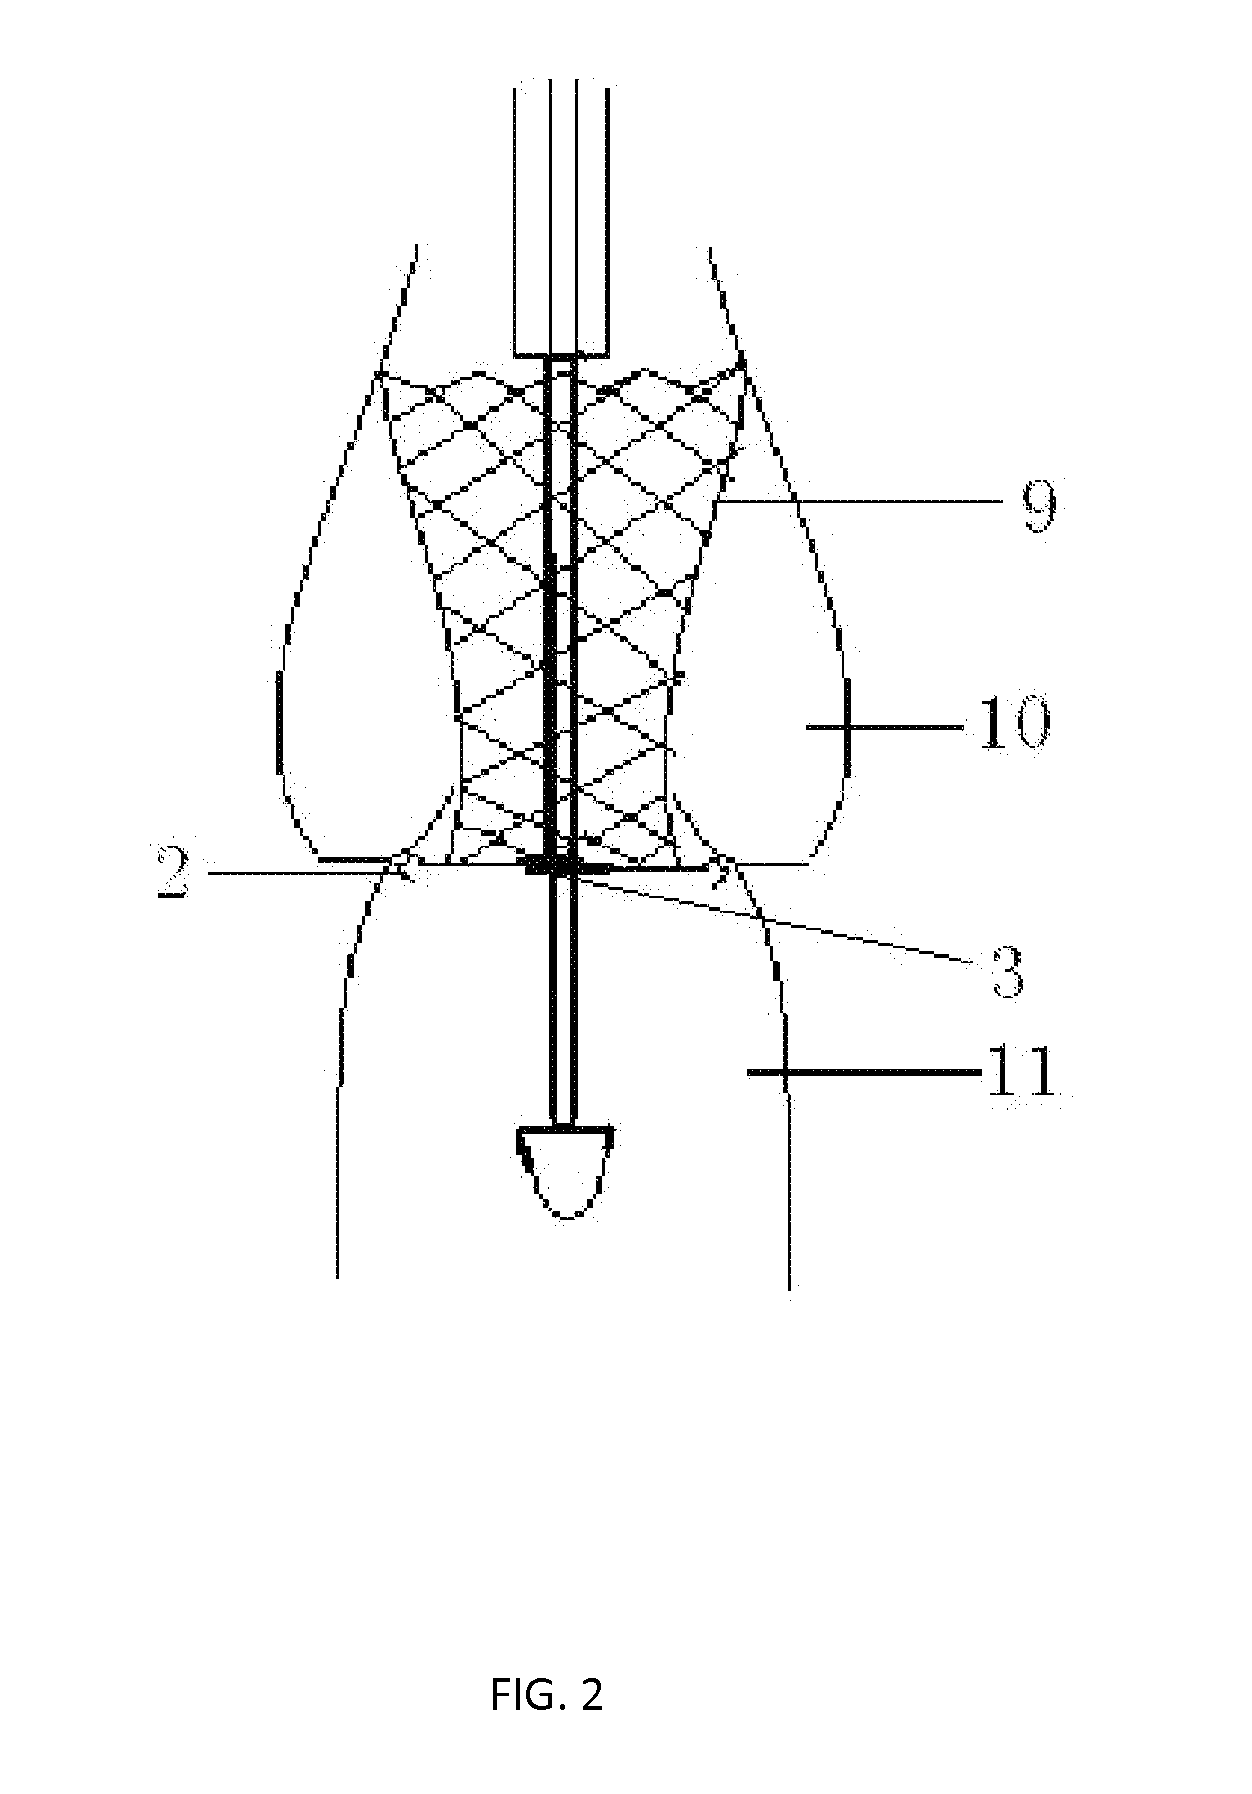 Conveying appliance with valve locating function for use during percutaneous aortic valve replacement operation